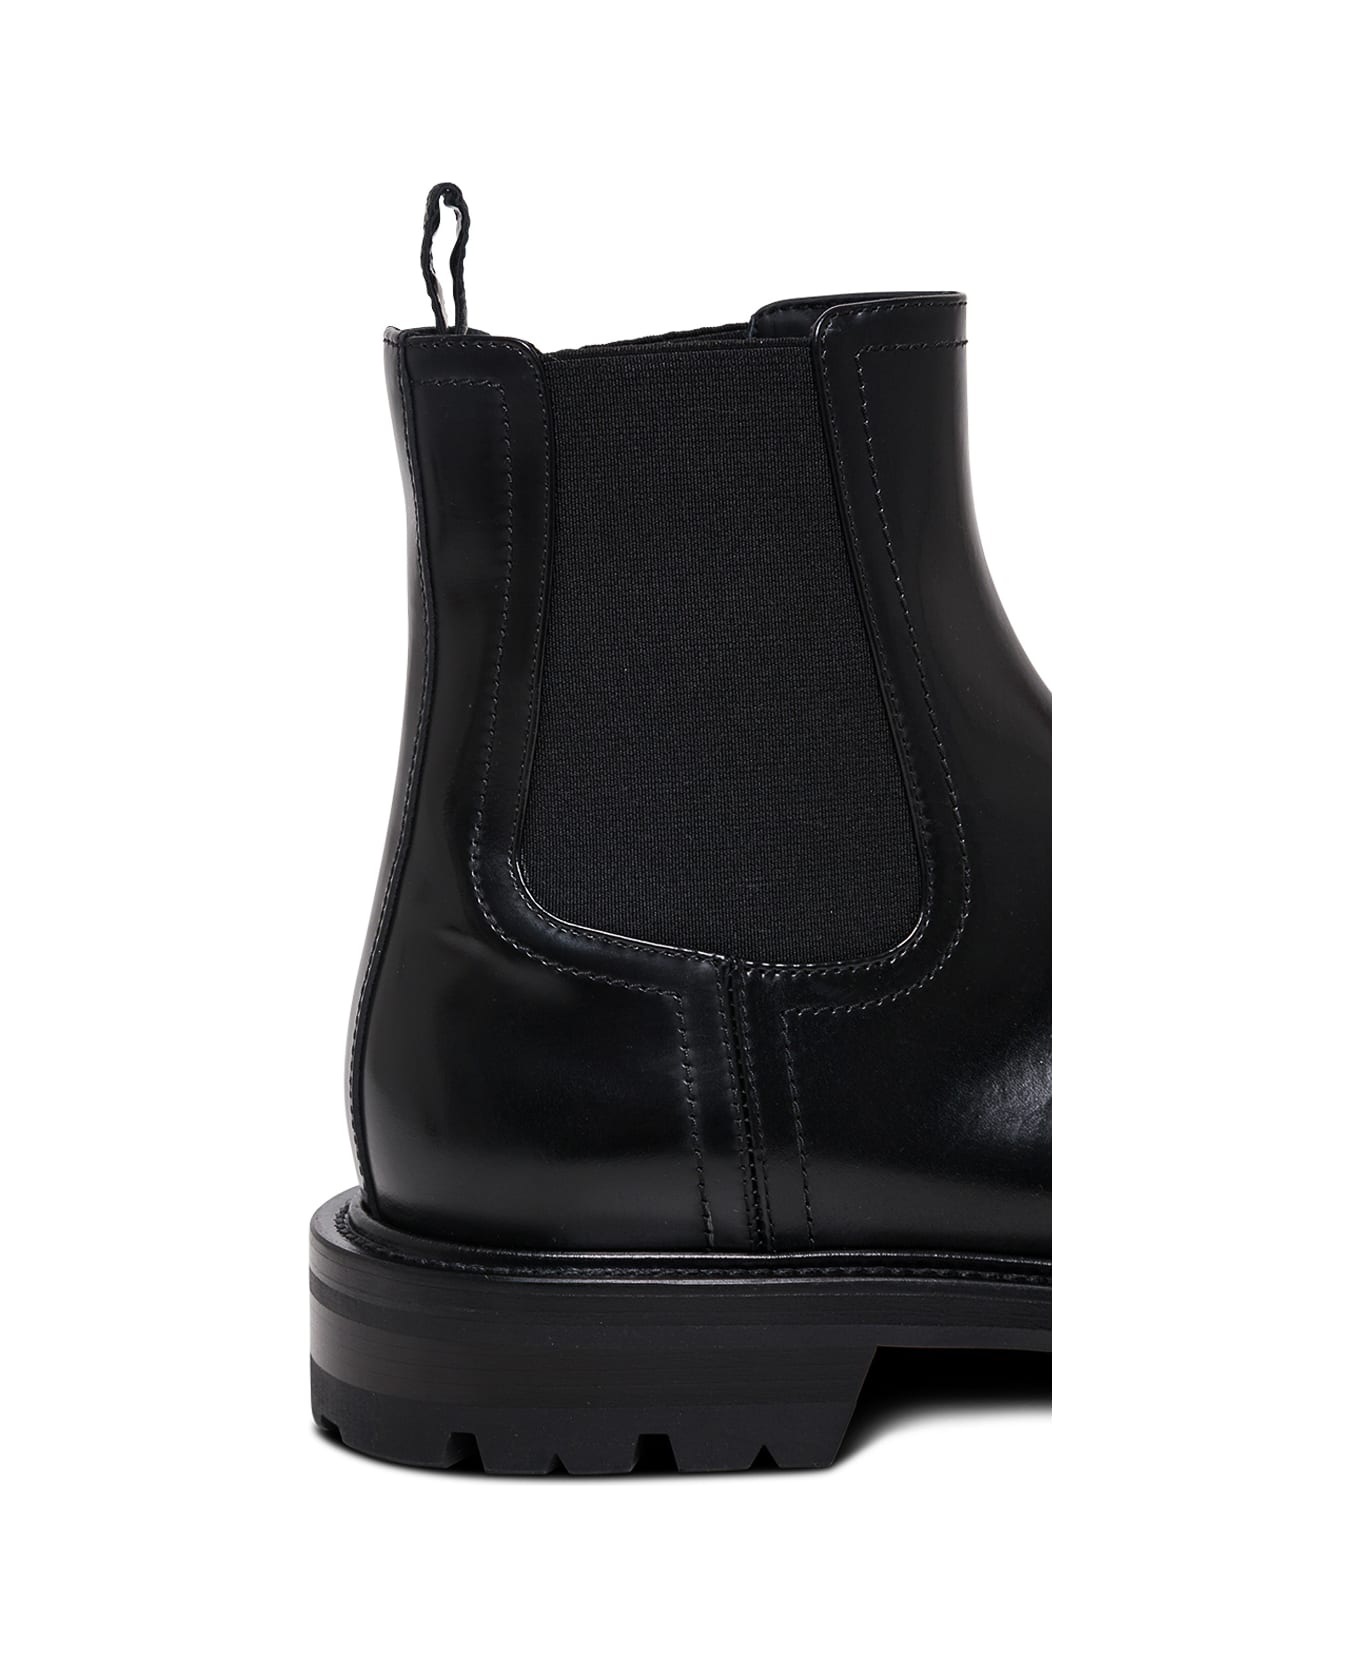 Alexander McQueen Man's Black Leather Ankle Boots - Black